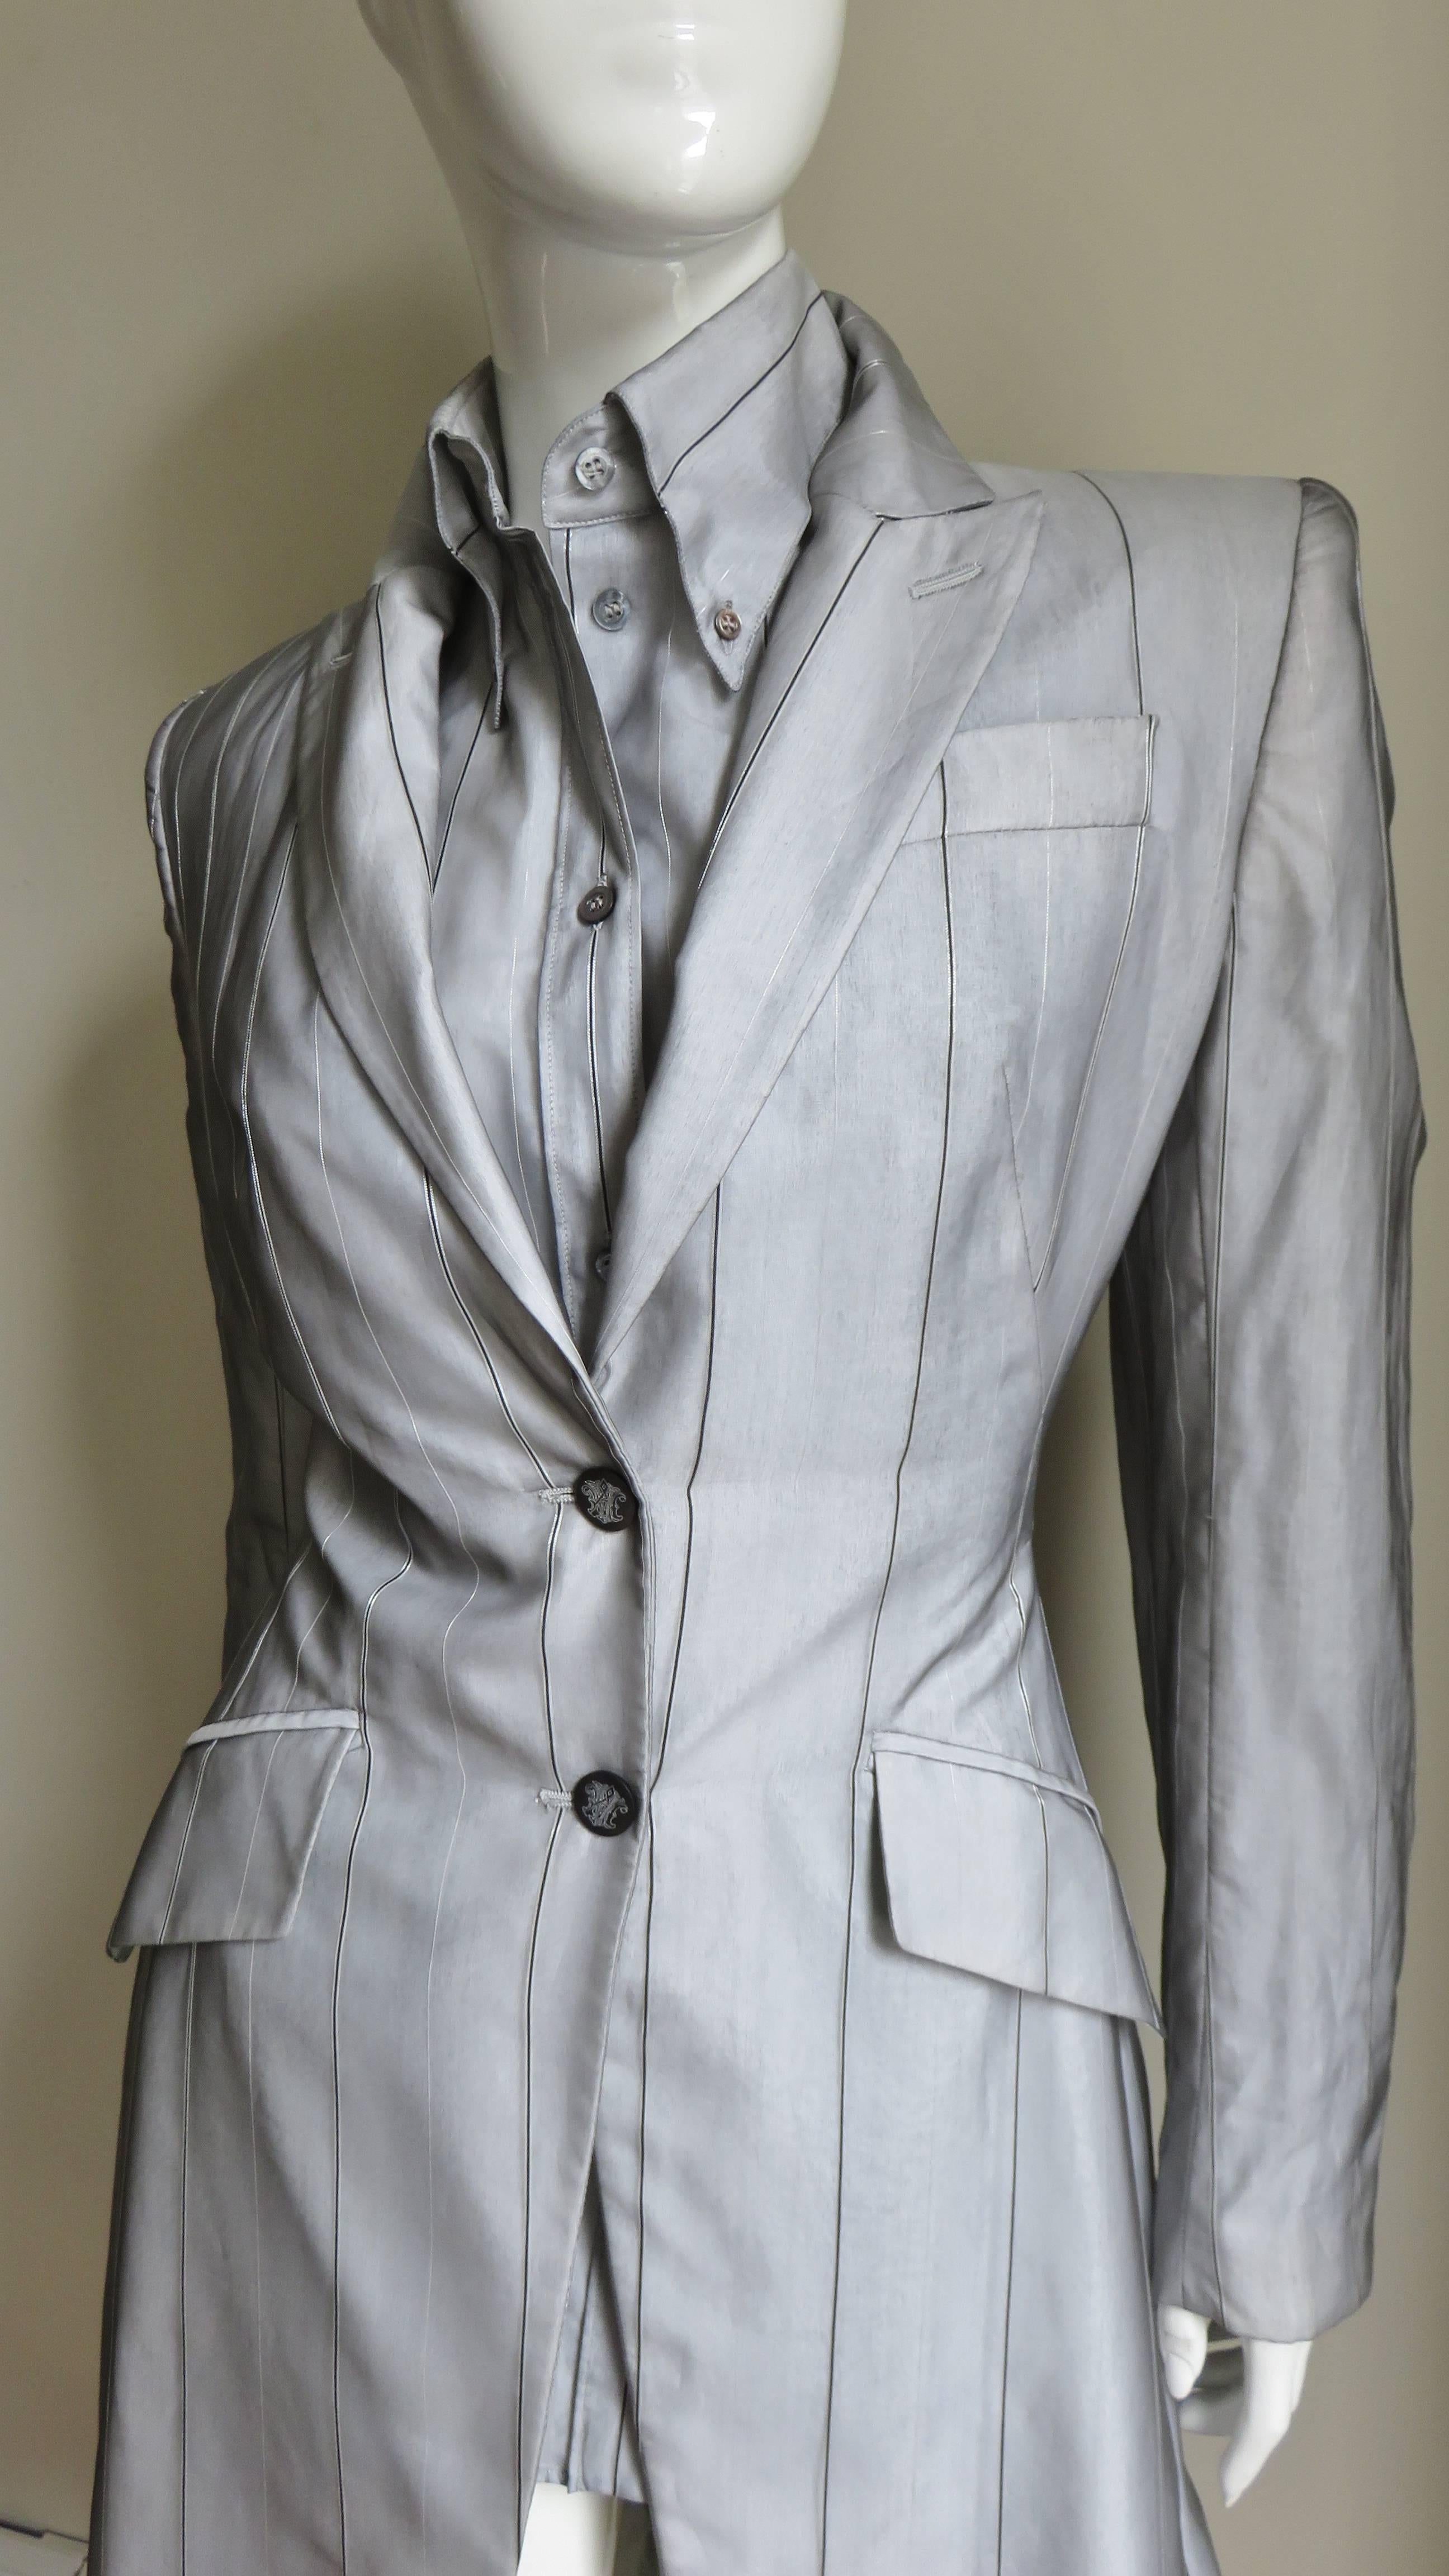 A fabulous 2 piece set by Alexander McQueen consisting of a long jacket and shirt in grey sheer silk with fine black and silver stripes over white. The shirt has a grey mother of pearl button down collar, button front, and sleeve cuffs plus a back